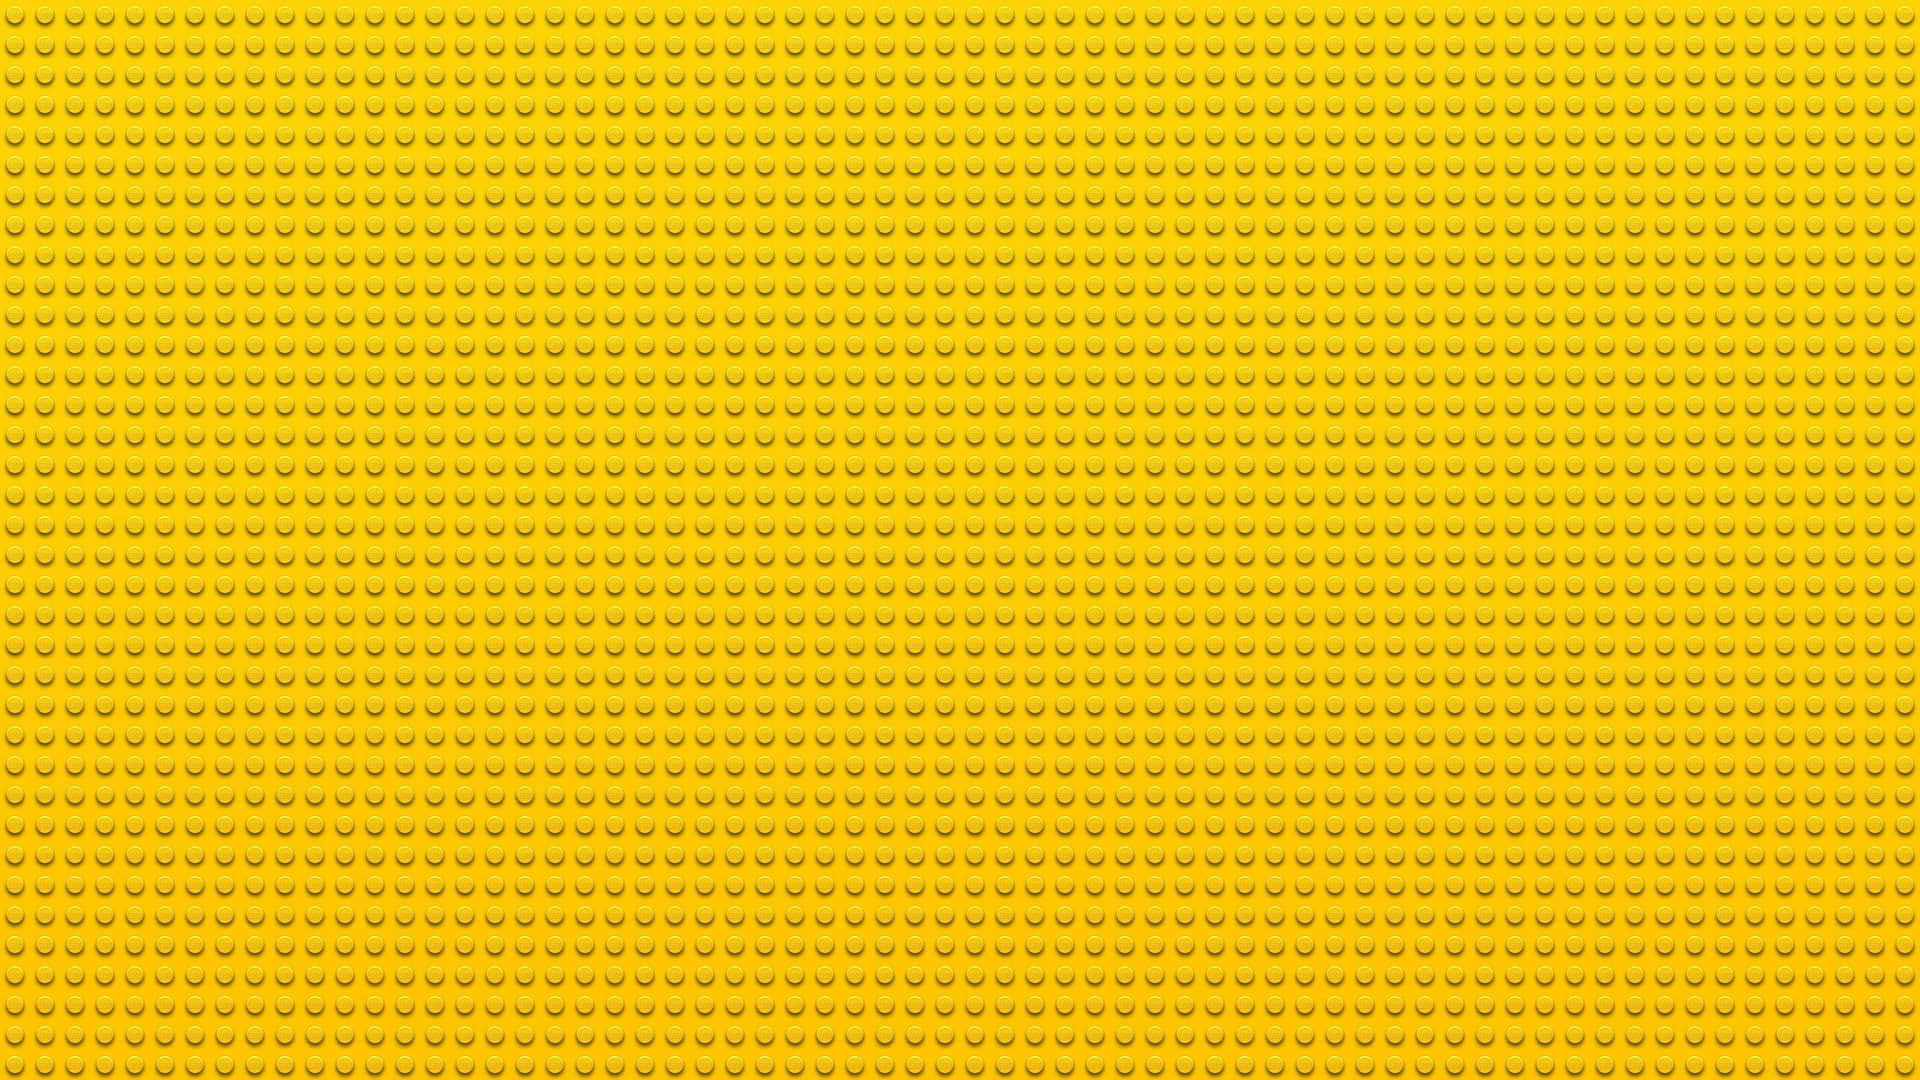 Sunny yellow background Wallpaper